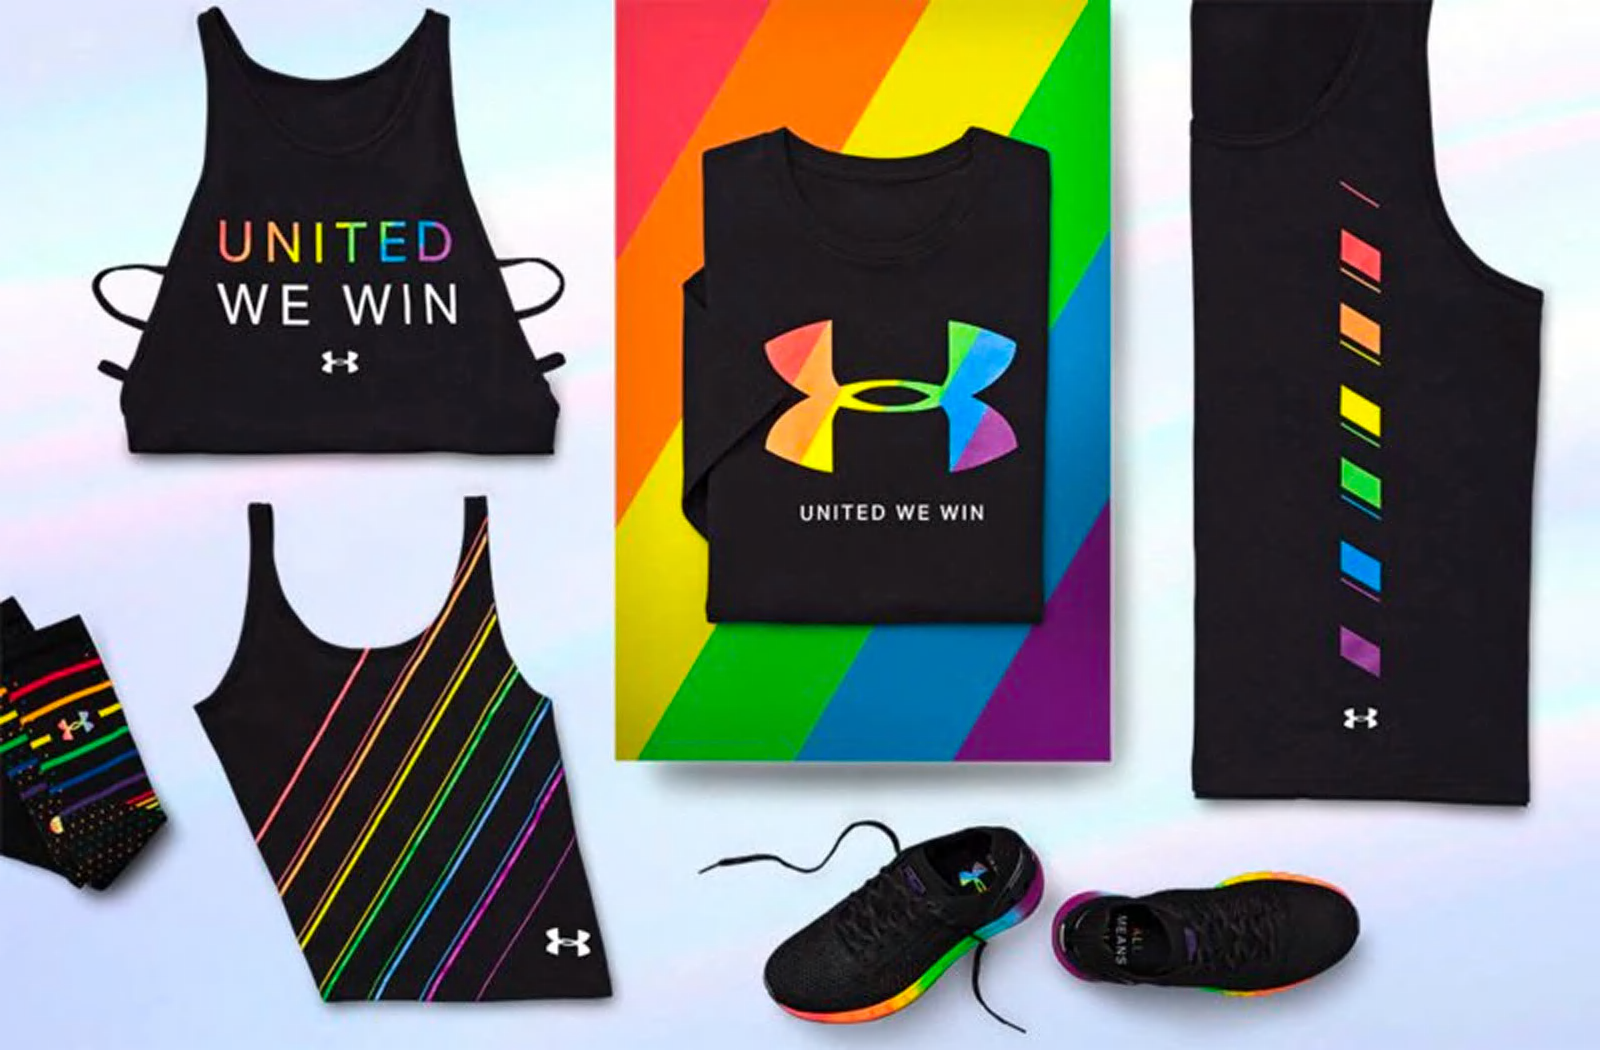 10 Pride products that donate to important LGBTQ causes